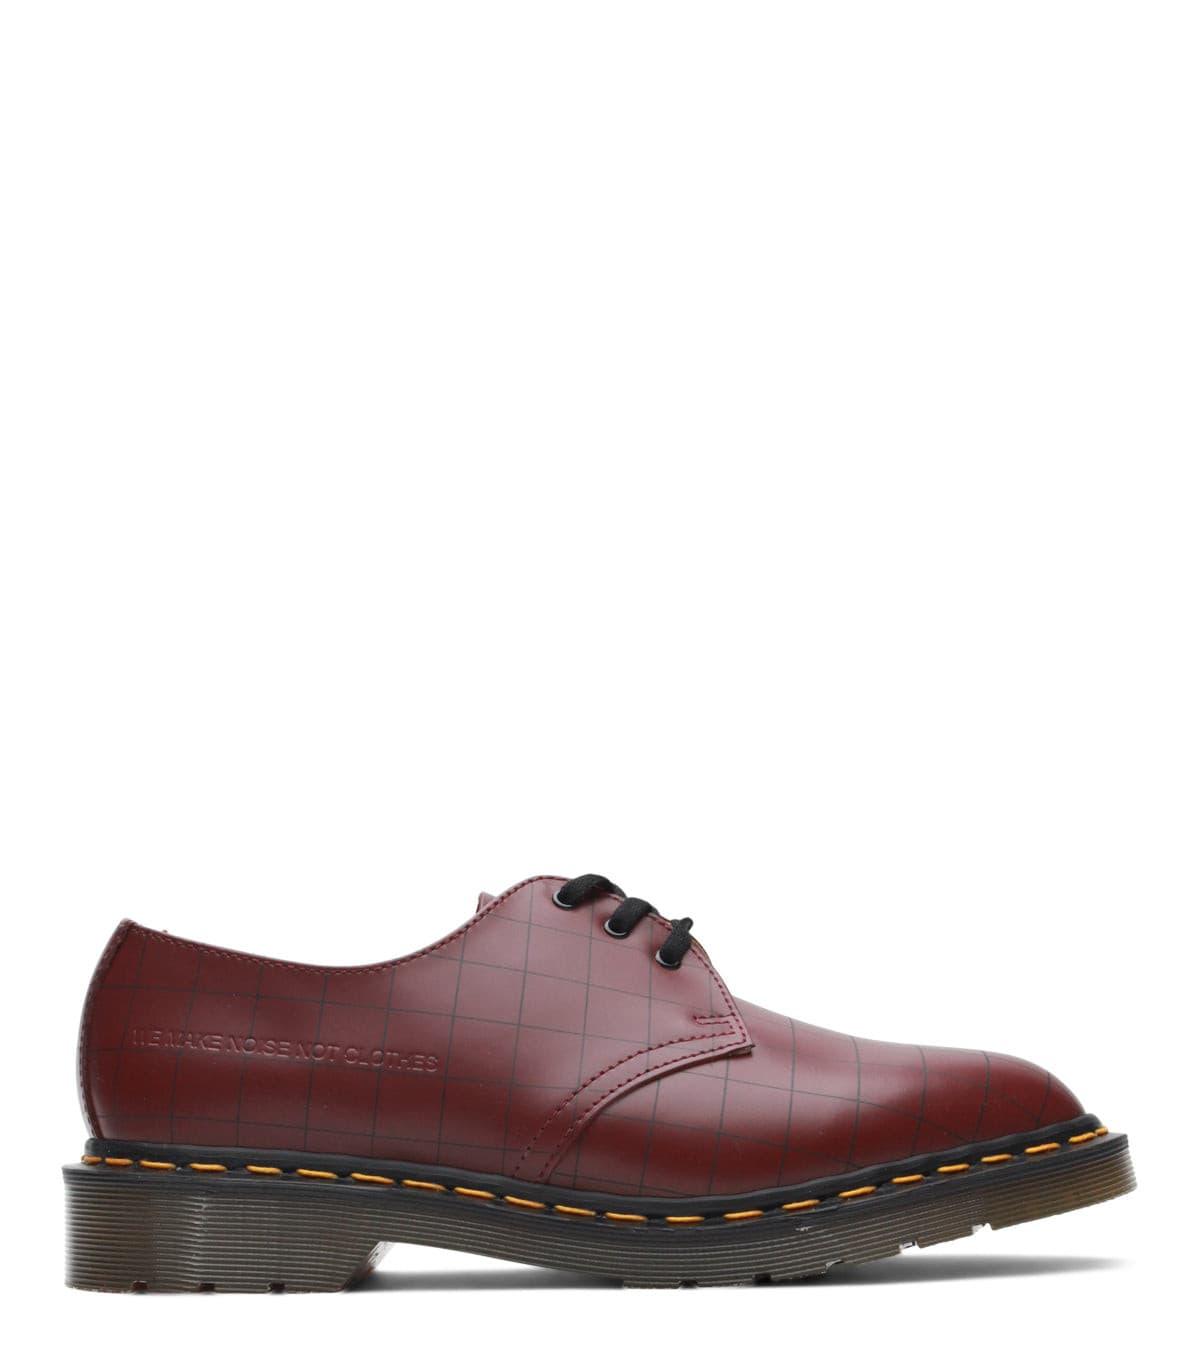 Dr. Martens 1461 Undercover Made in England Leather Oxford Smooth Cherry